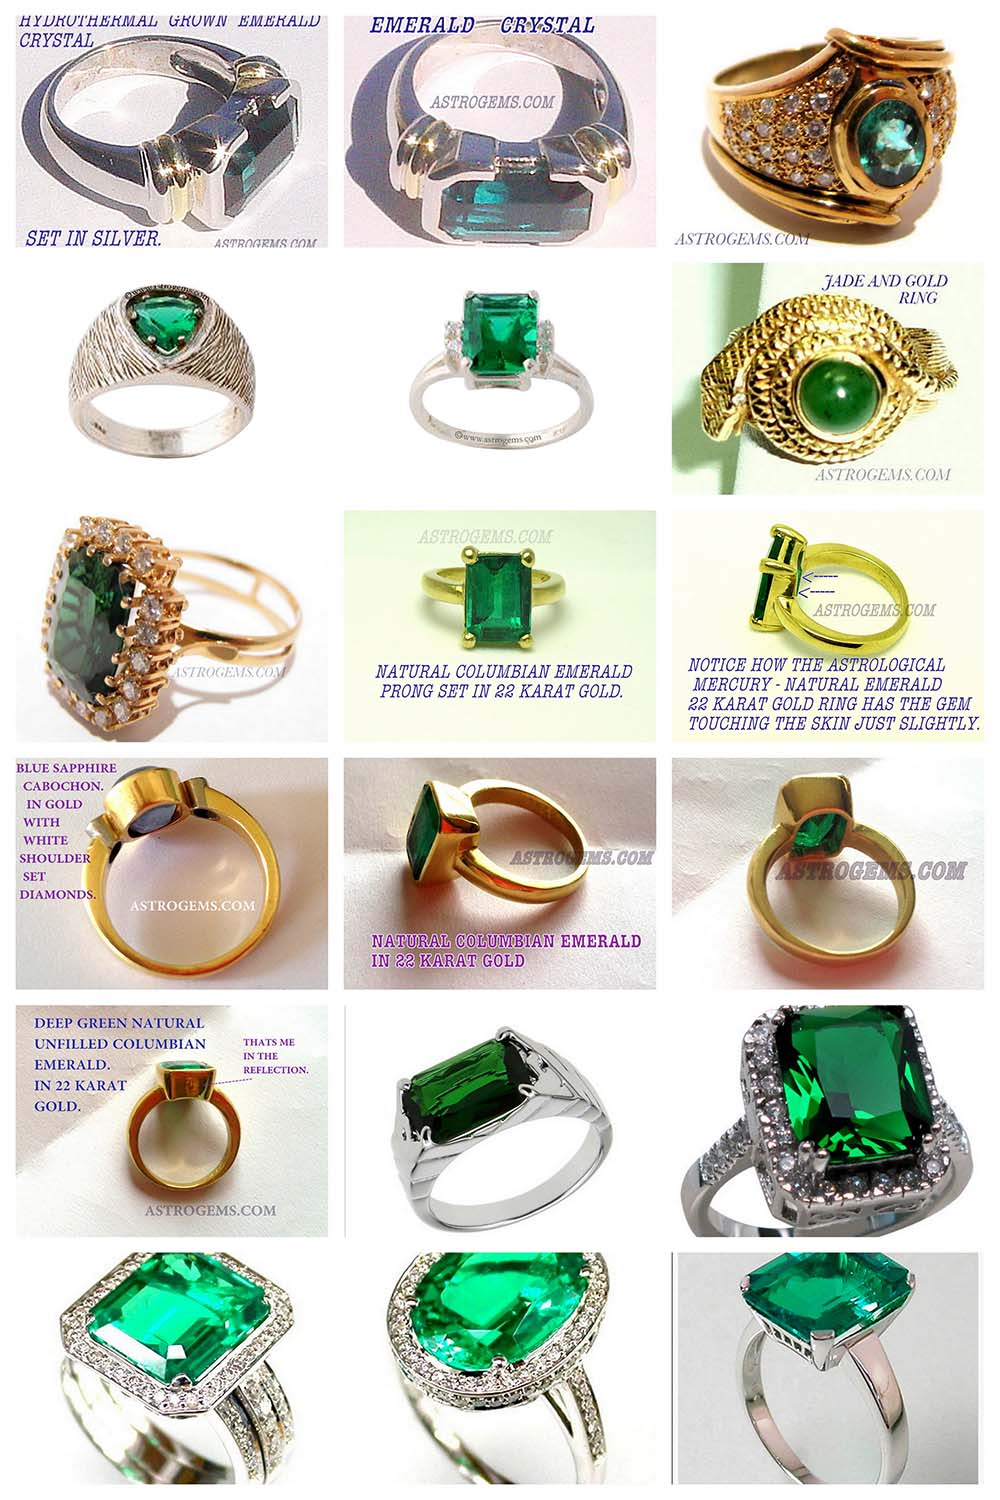 Astrogems makes a variety of astrological emerald rings.